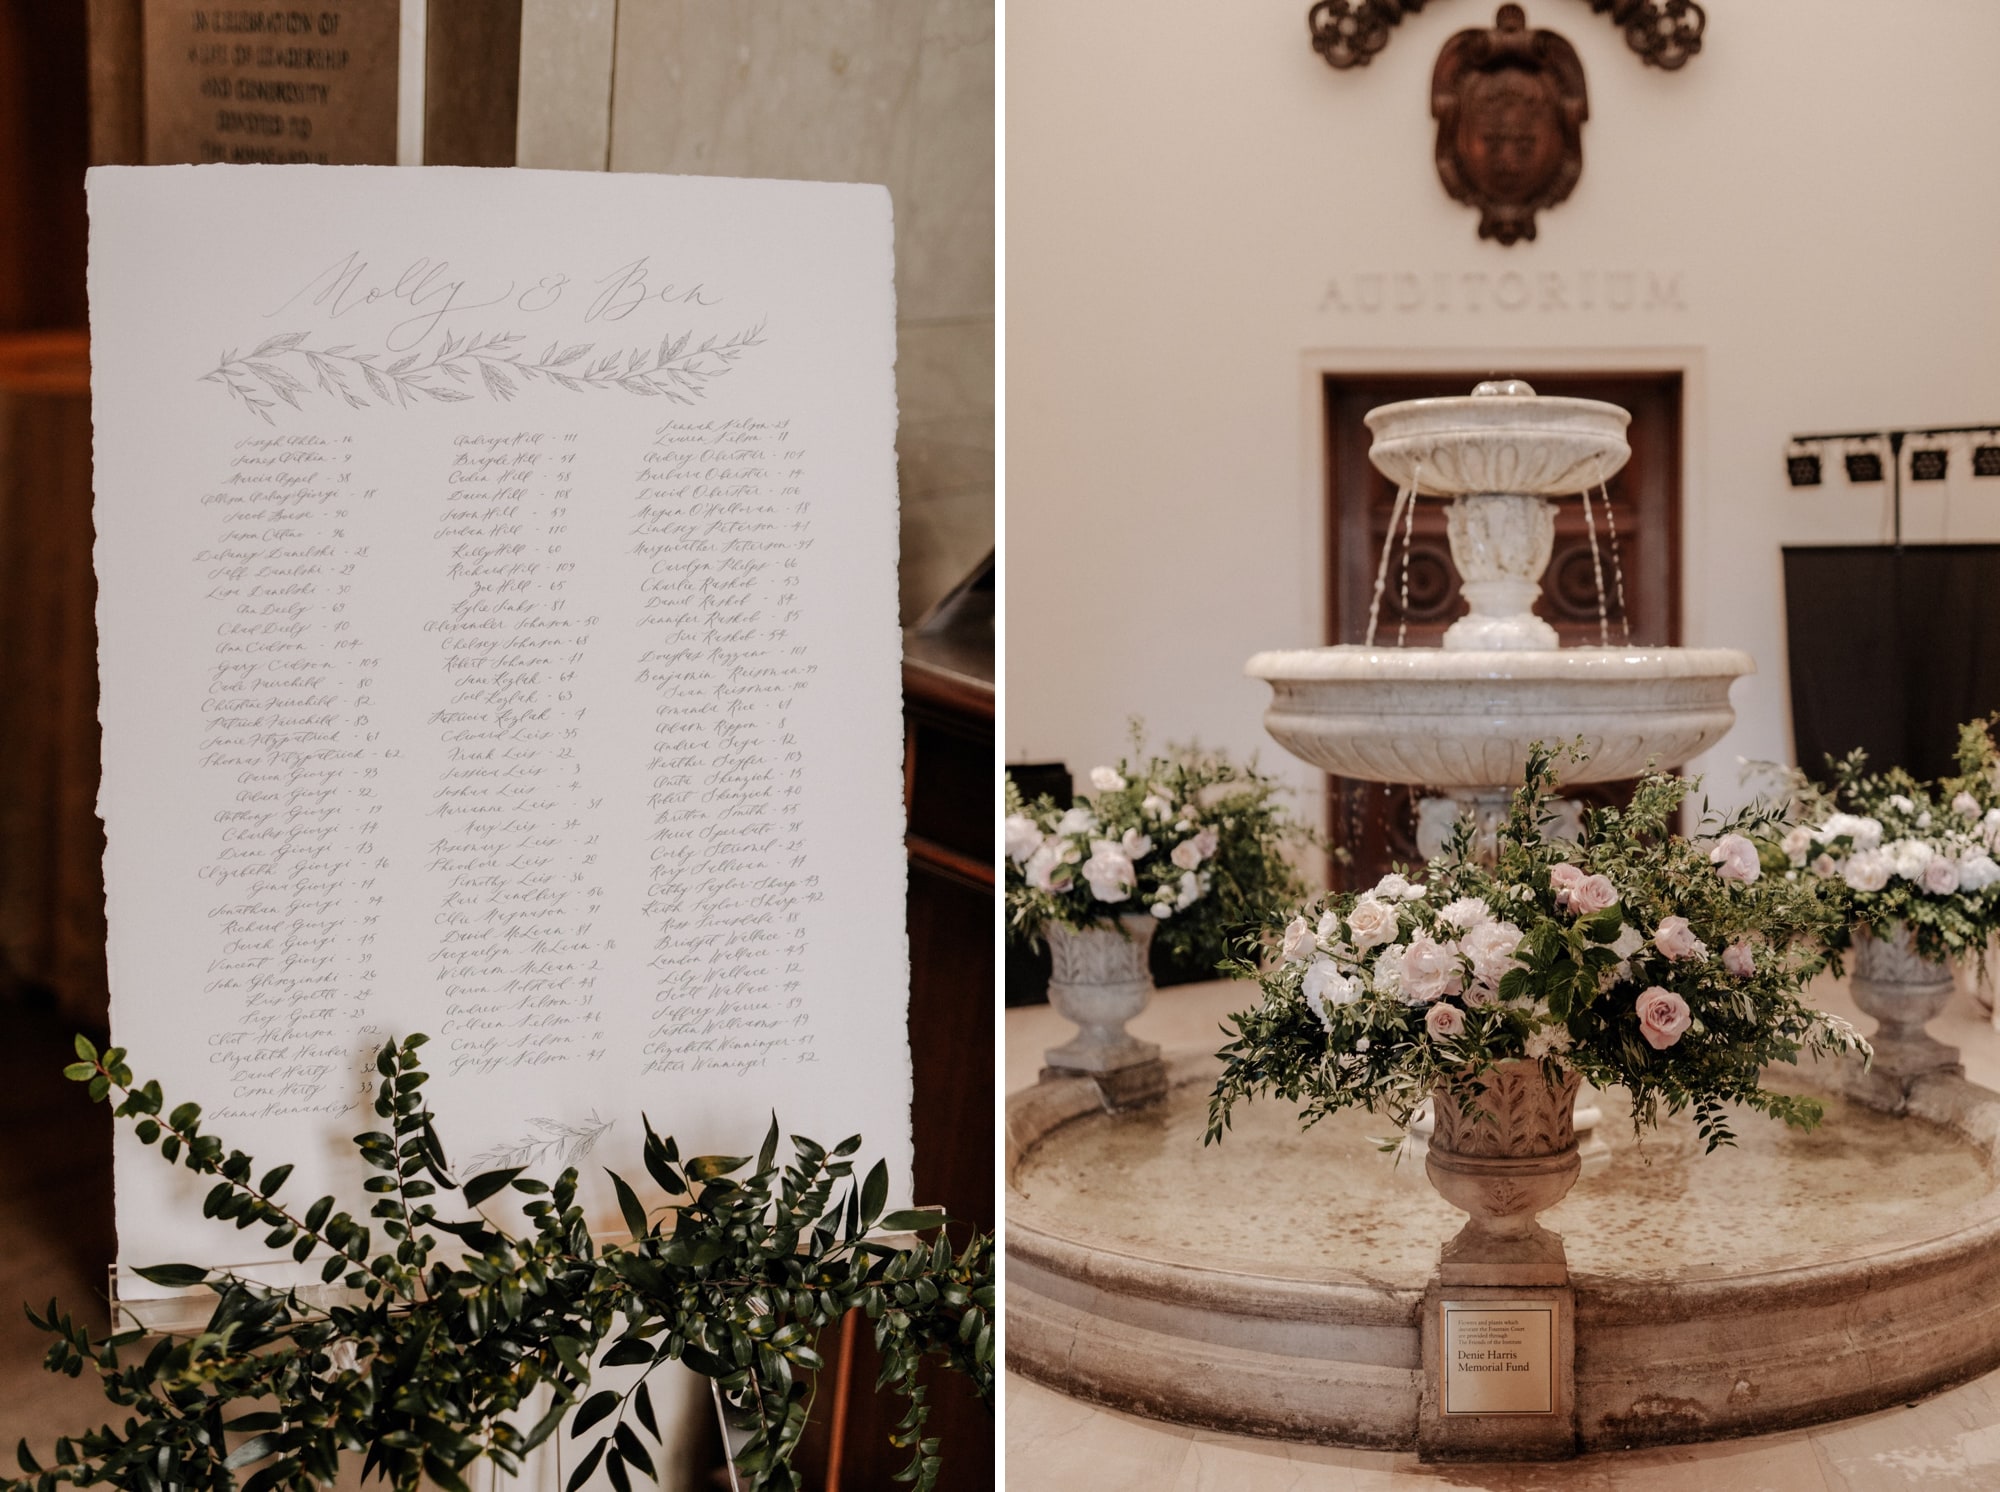 A beautiful seating chart stands in the entrance of the Minneapolis Institute of Art during a wedding captured by photographer J.Olson Weddings.